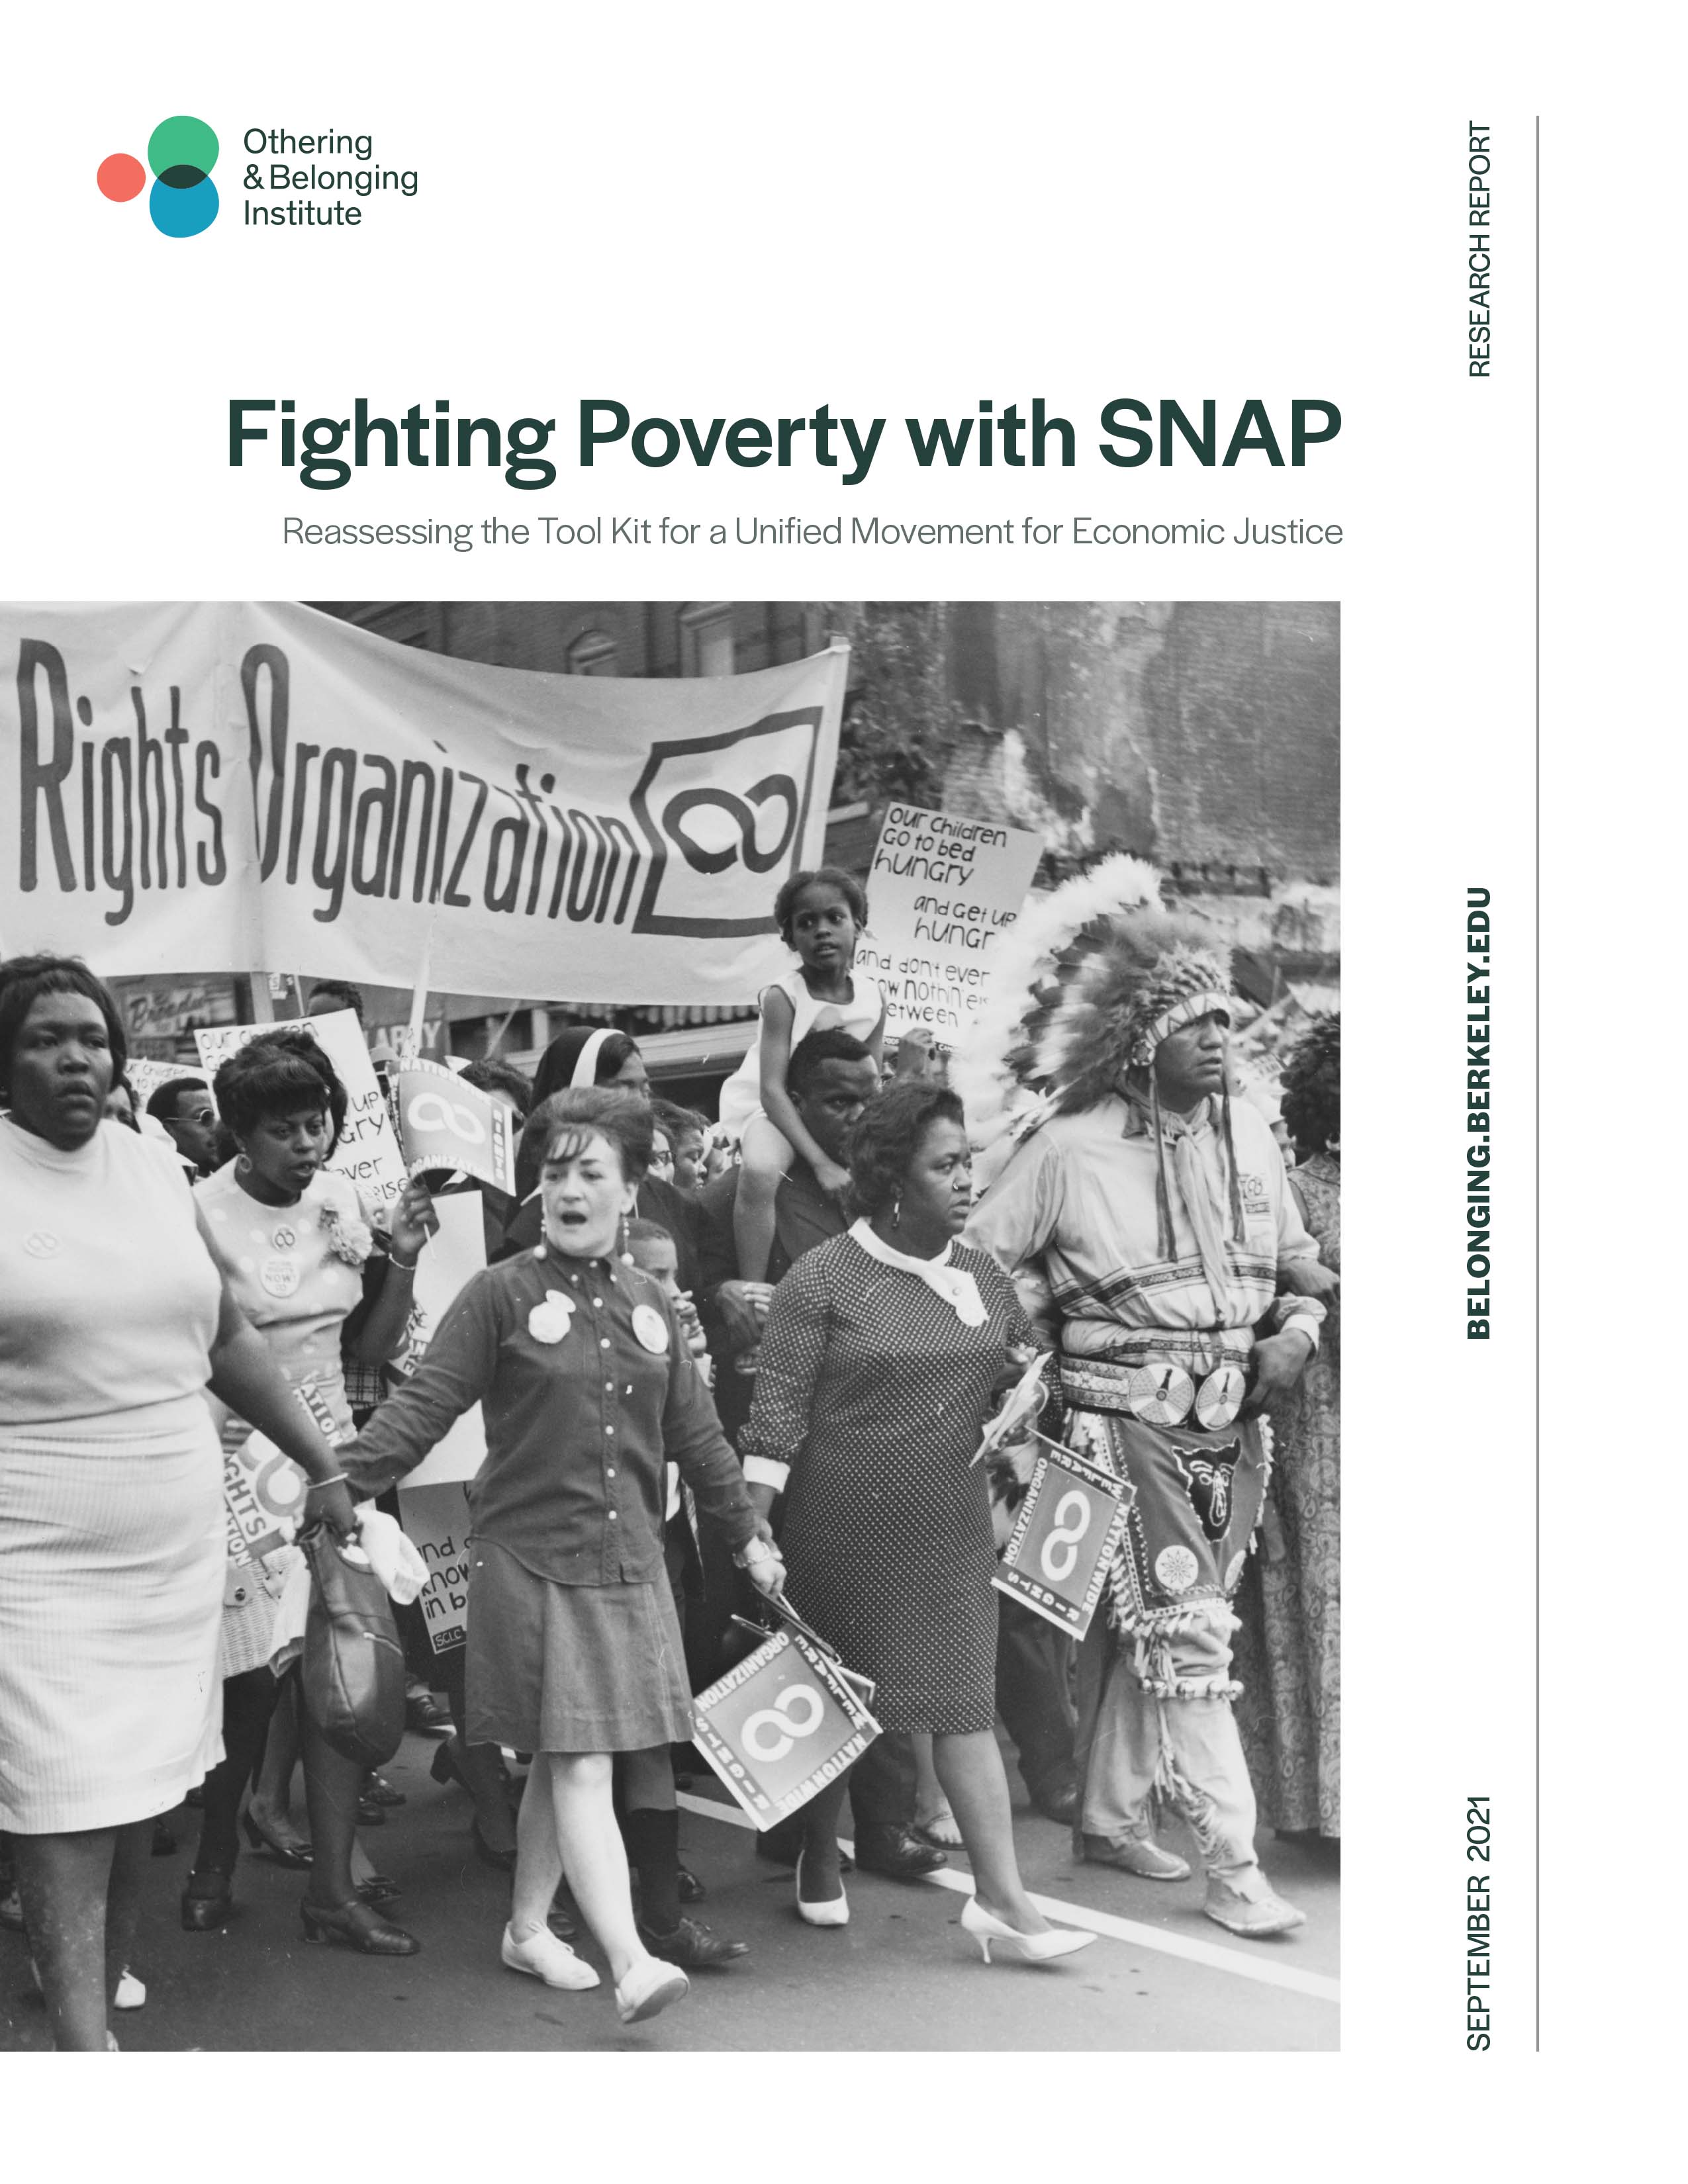 cover of the report featuring a black and white image of a welfare rights protest